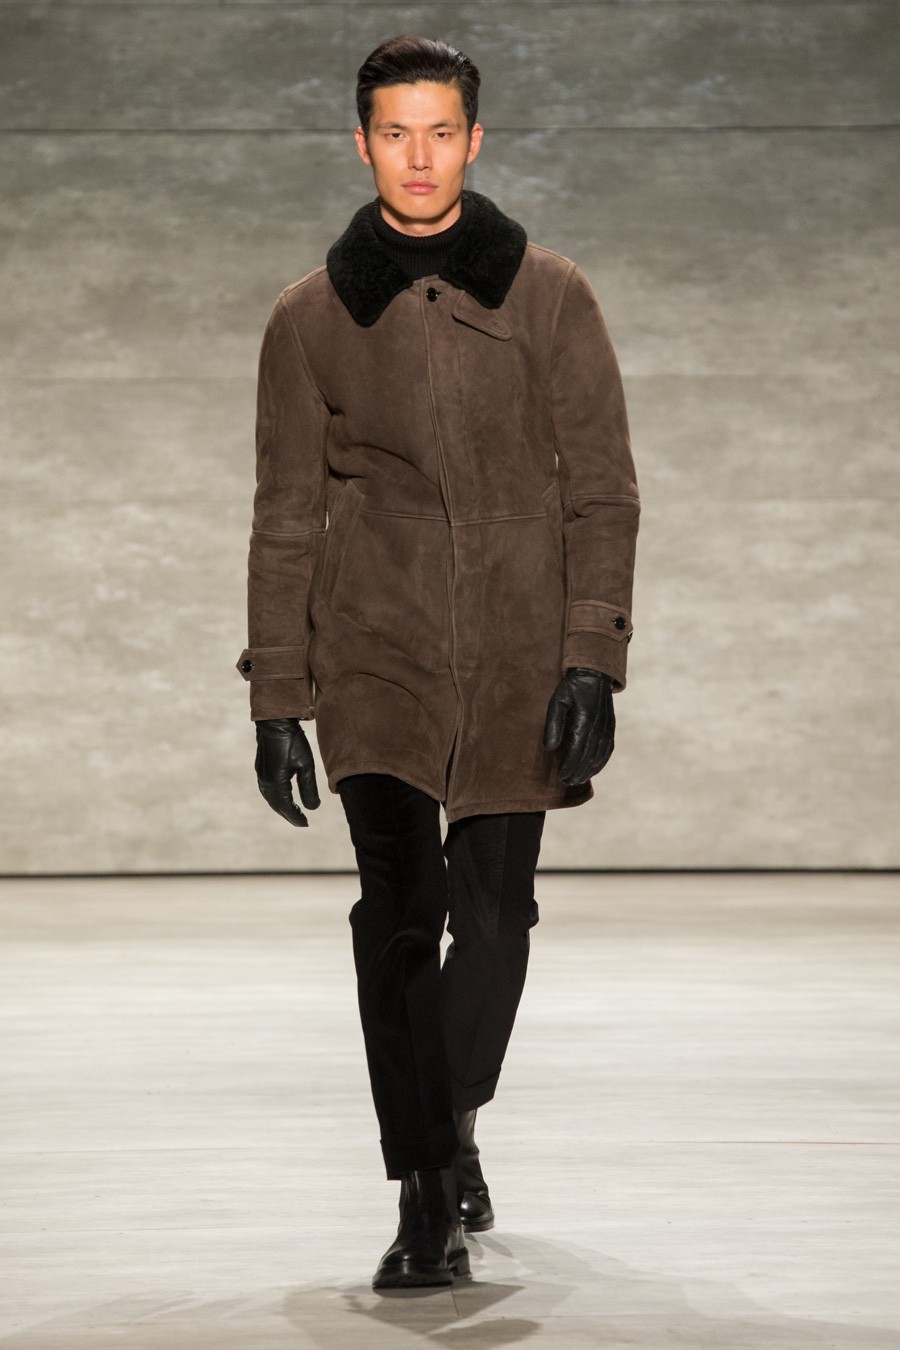 Todd Snyder Fall Winter 2015 Menswear Collection 019